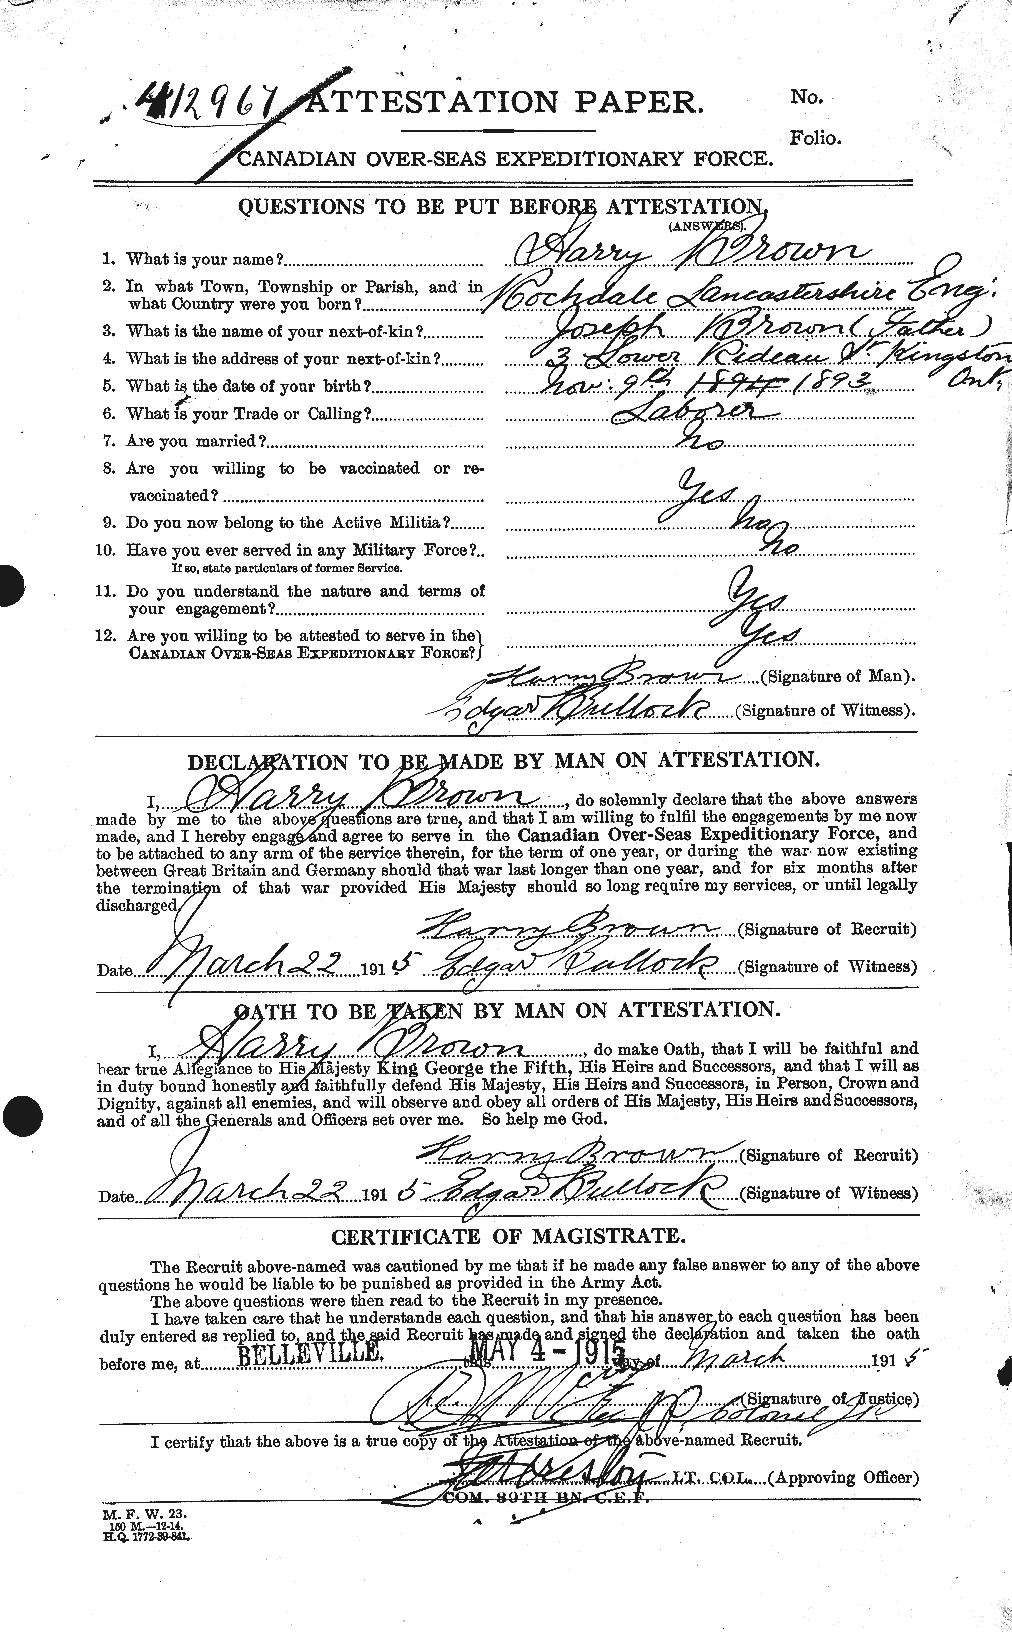 Personnel Records of the First World War - CEF 265397a